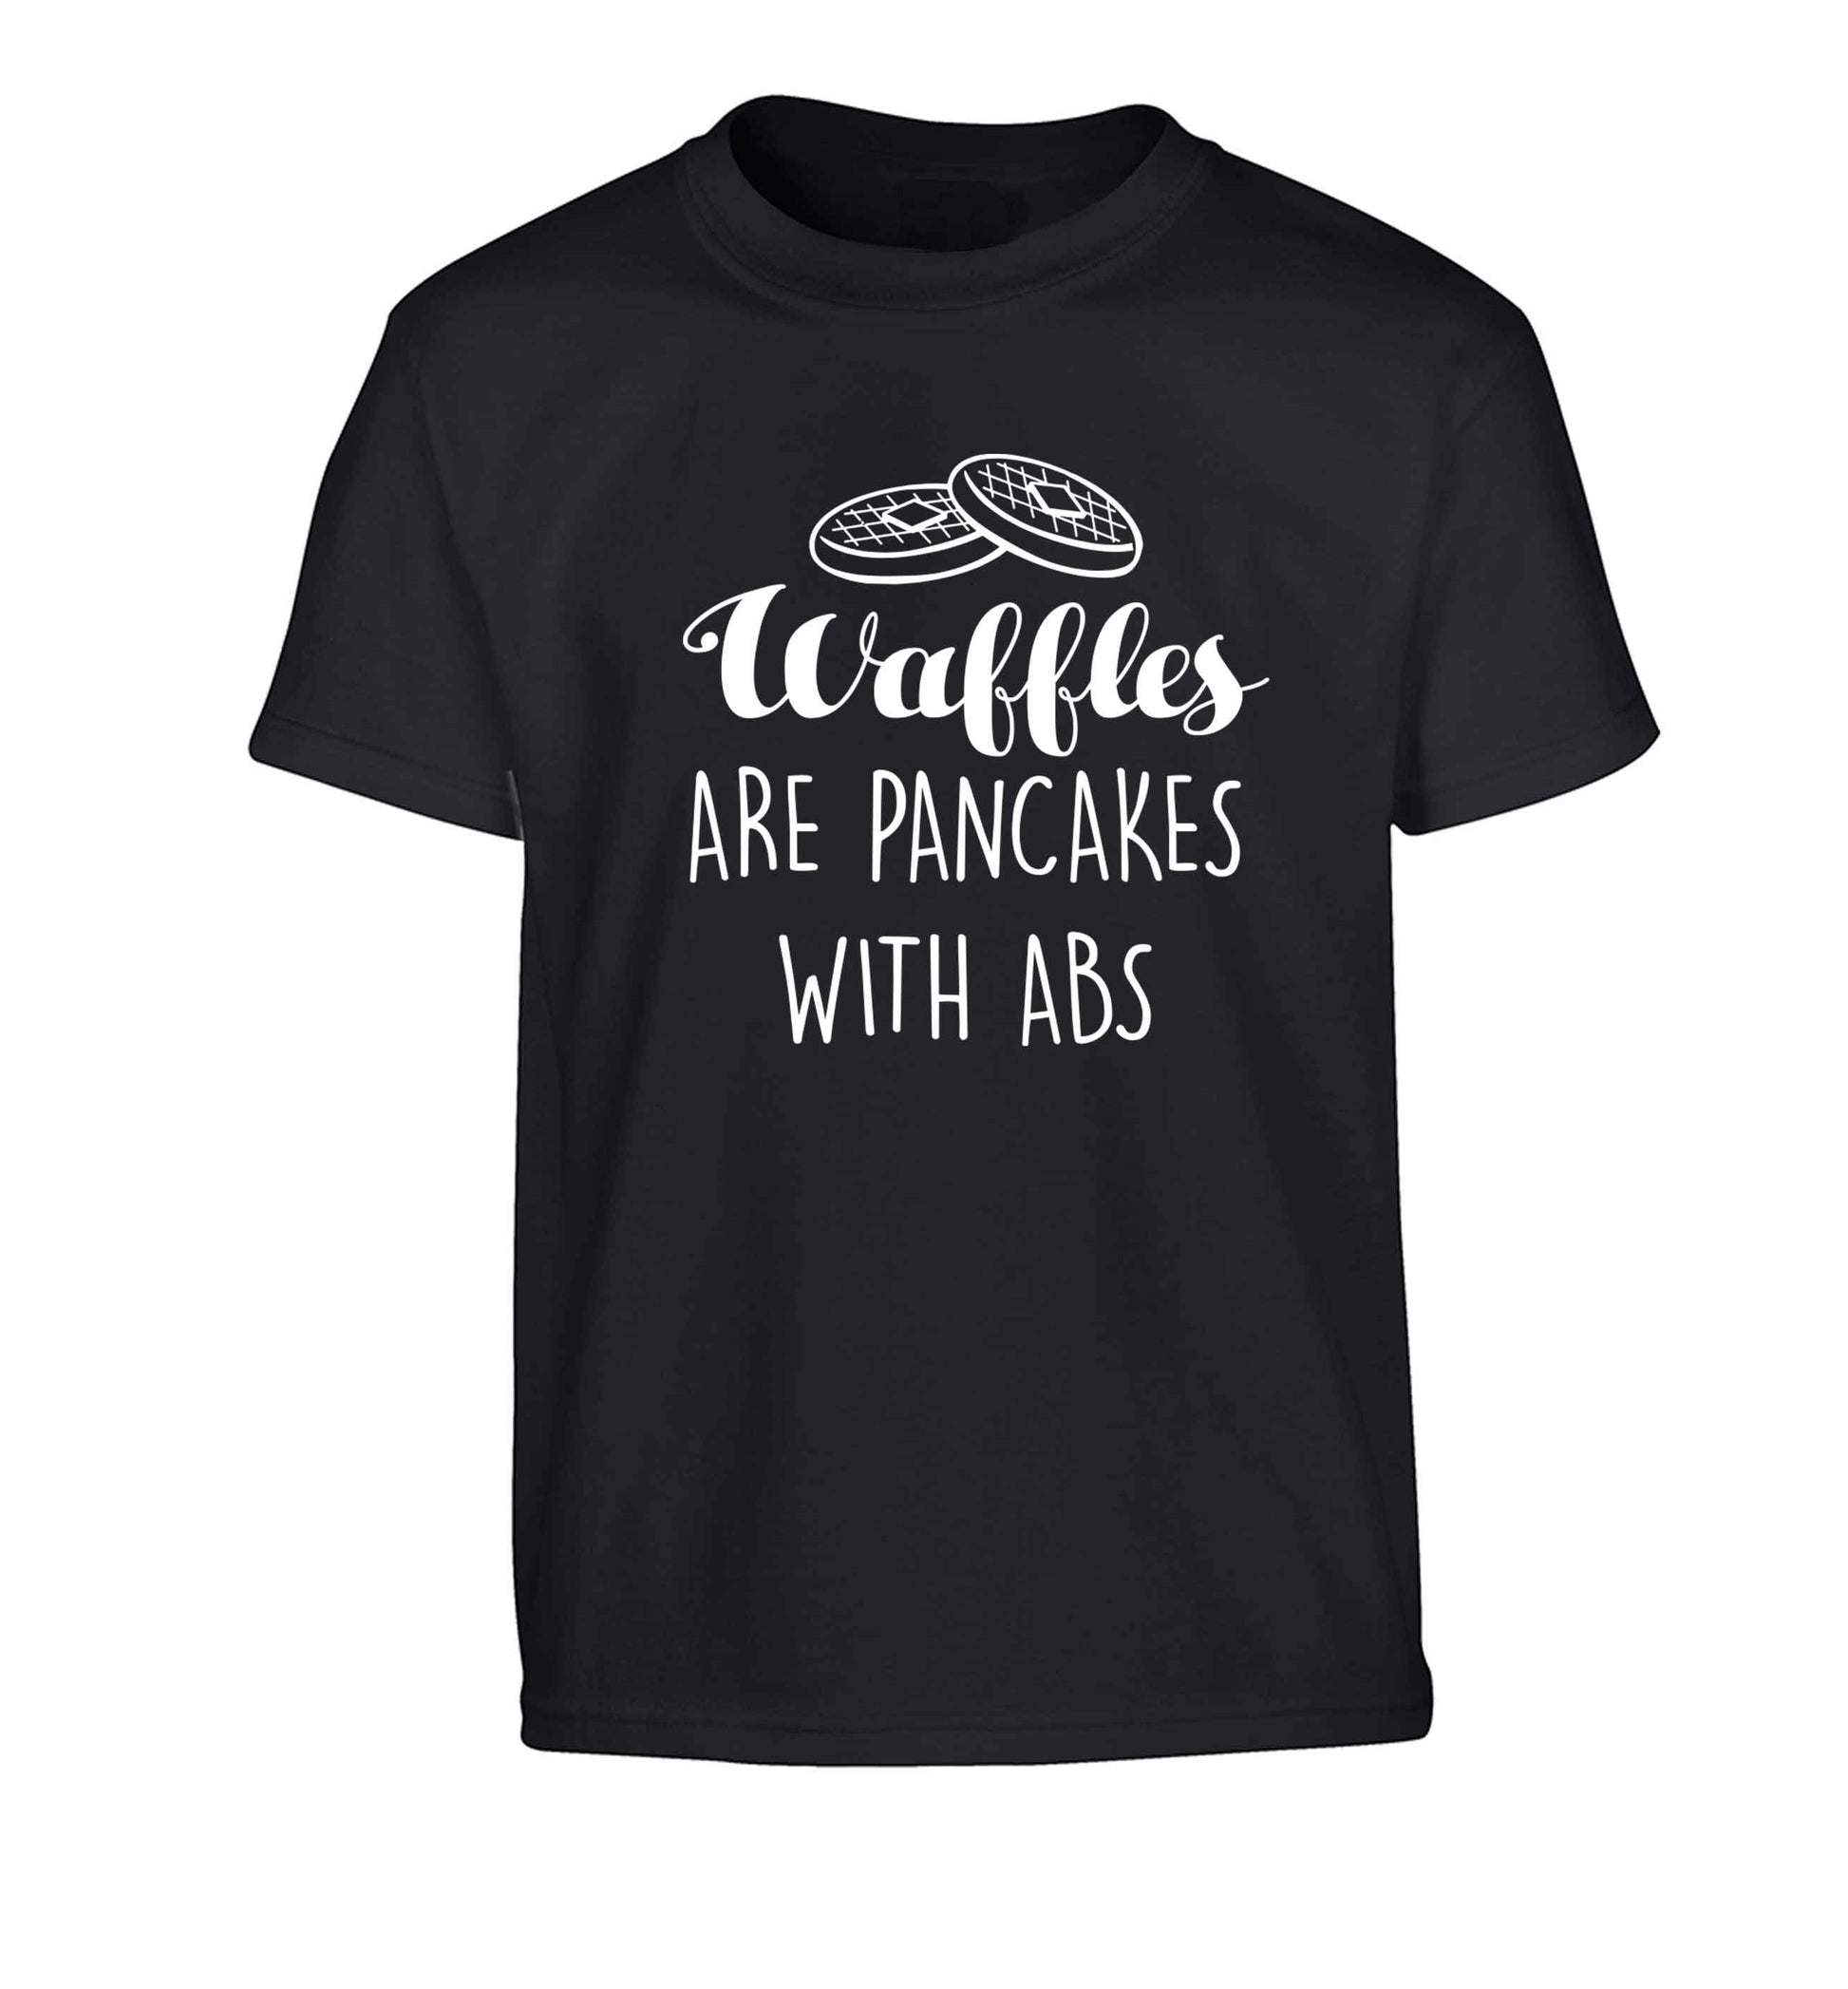 Waffles are just pancakes with abs Children's black Tshirt 12-13 Years